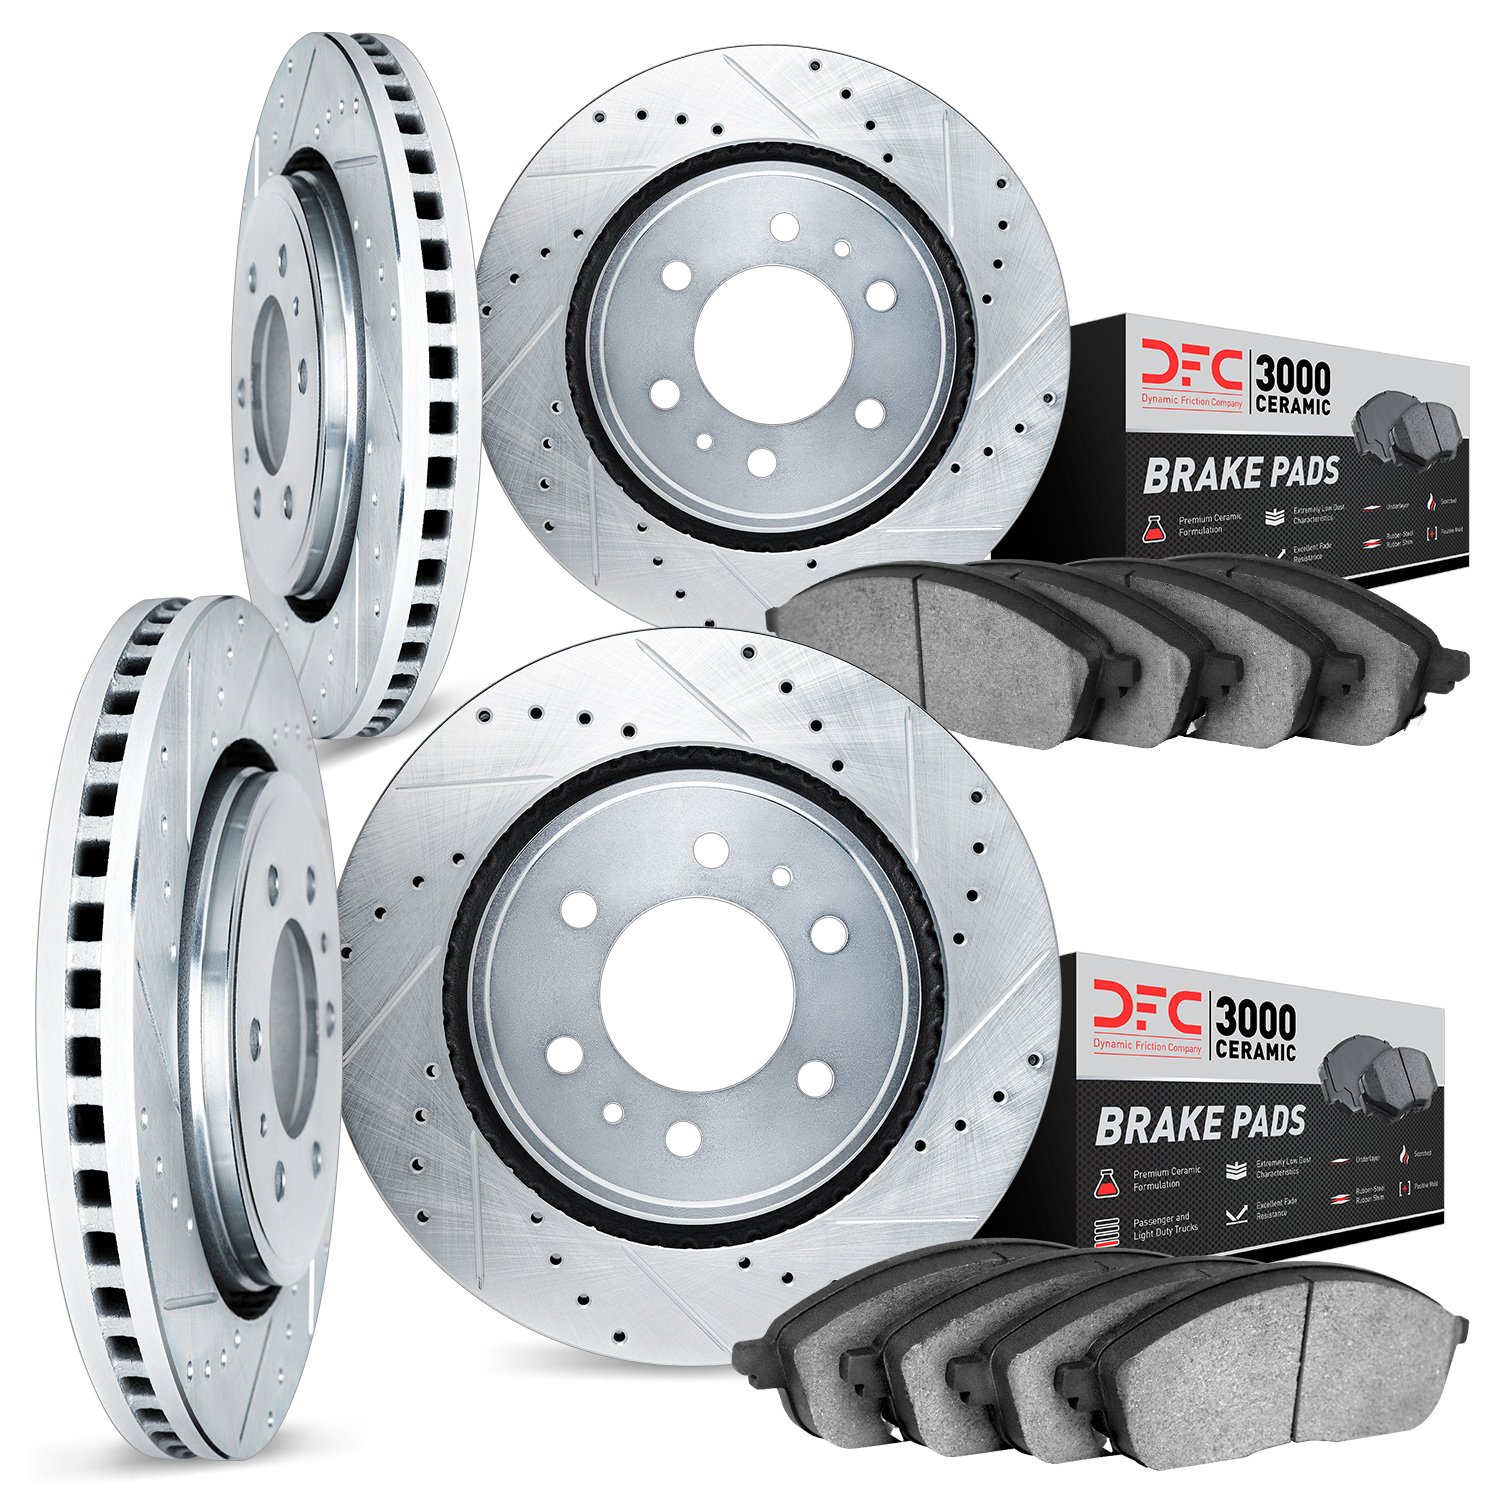 7304-54067 Drilled/Slotted Brake Rotor with 3000-Series Ceramic Brake Pads Kit [Silver], 2009-2009 Ford/Lincoln/Mercury/Mazda, P